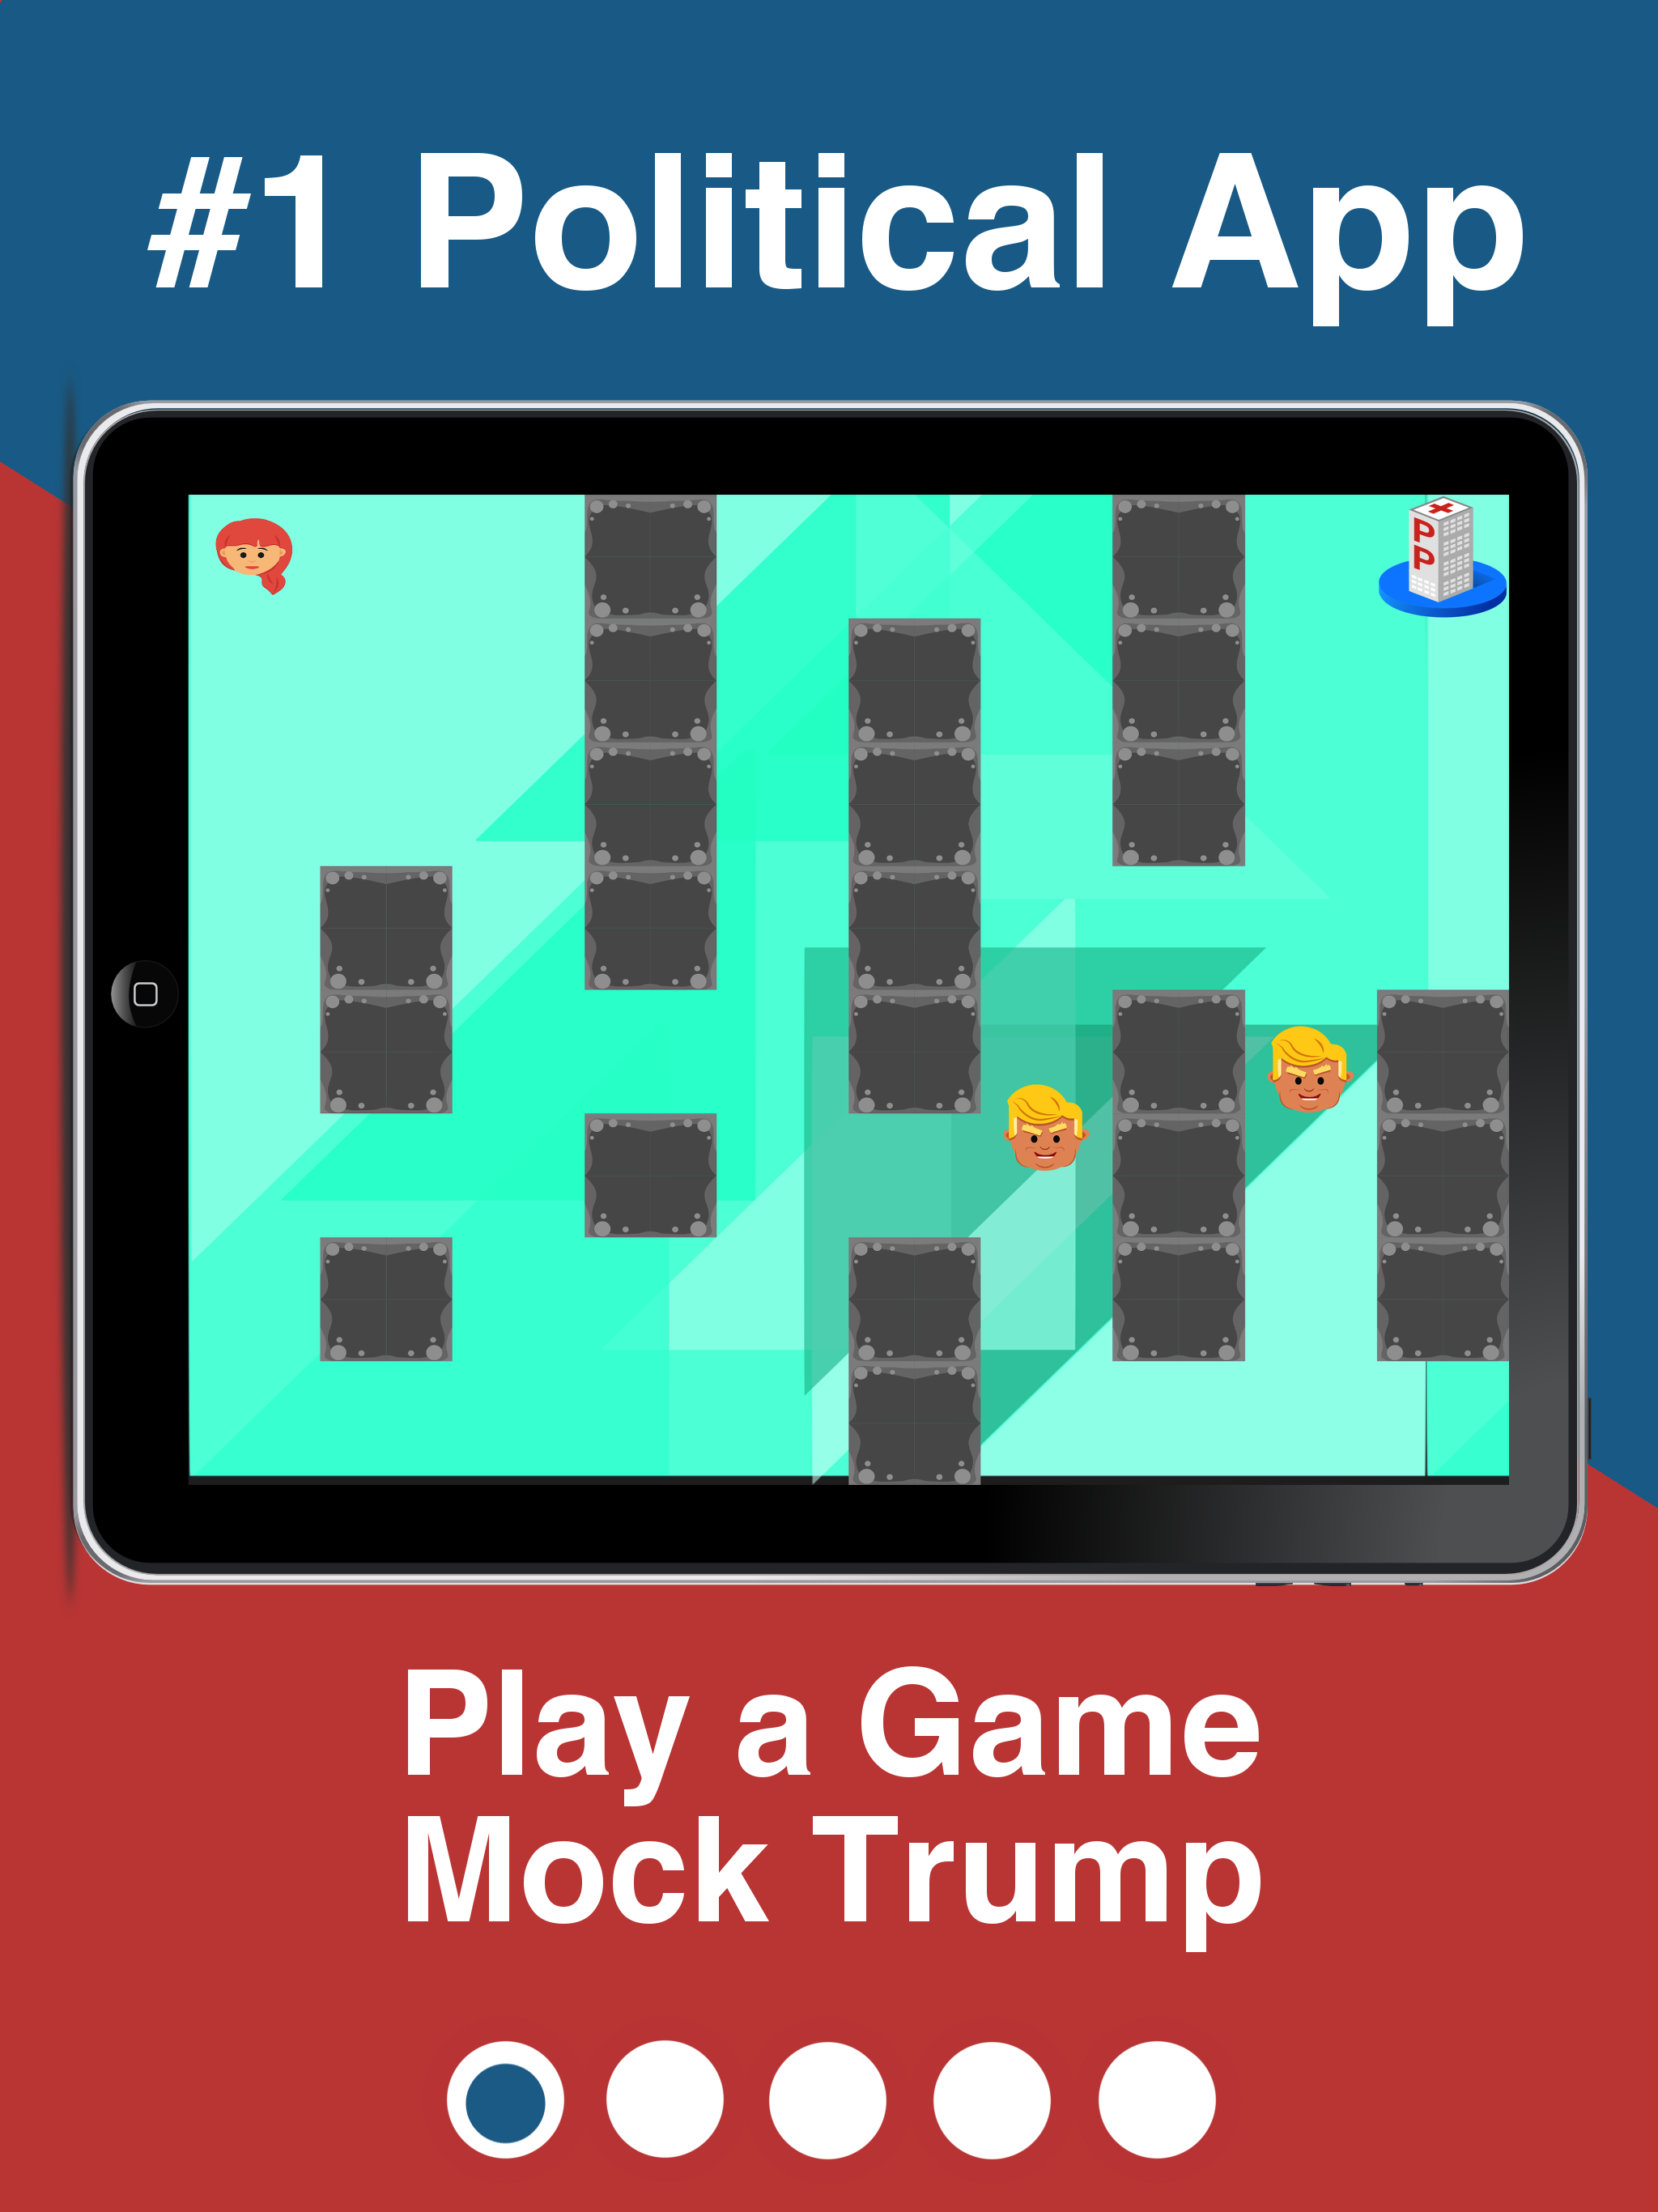 A mobile app called she persisted. The photo has text above that says #1 Political App. The text below says: Play a game, Mock Trump. The Background is split in half with solid red and solid blue. The iPad with the app running is in the center. A young women has to go around walls and avoid trump from grabbing her.